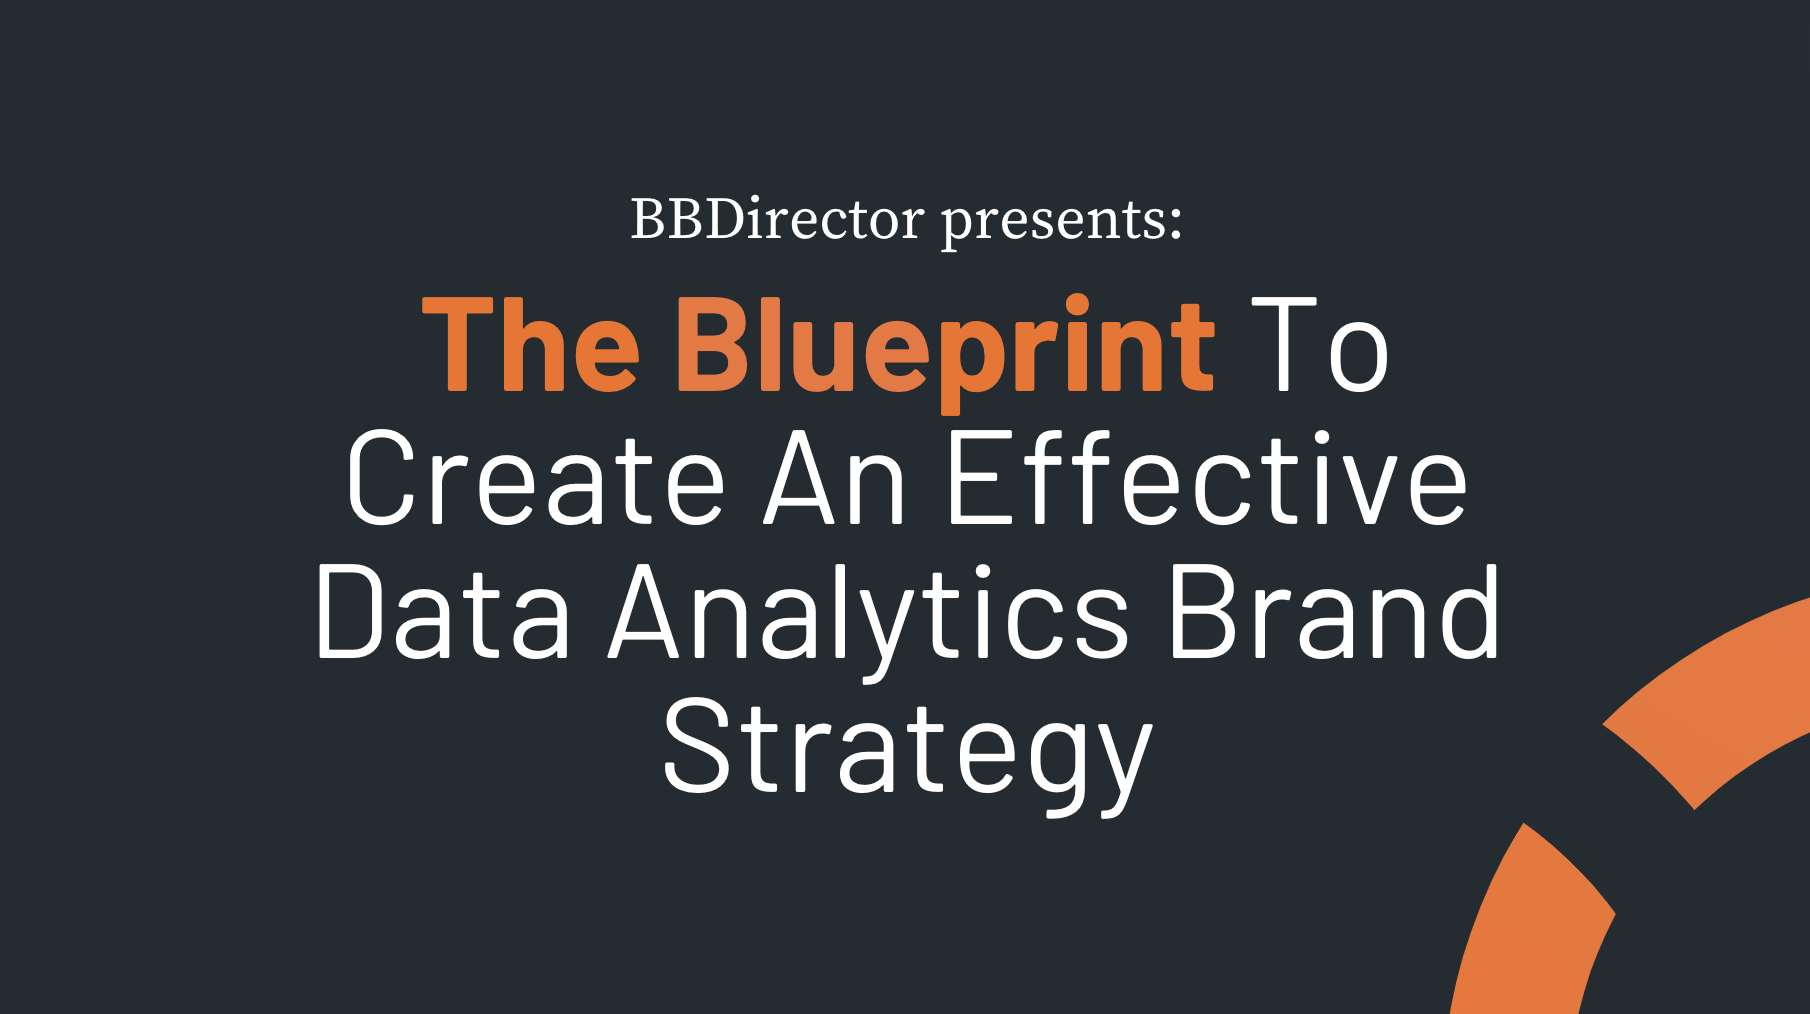 brand strategy guide for data analytics companies